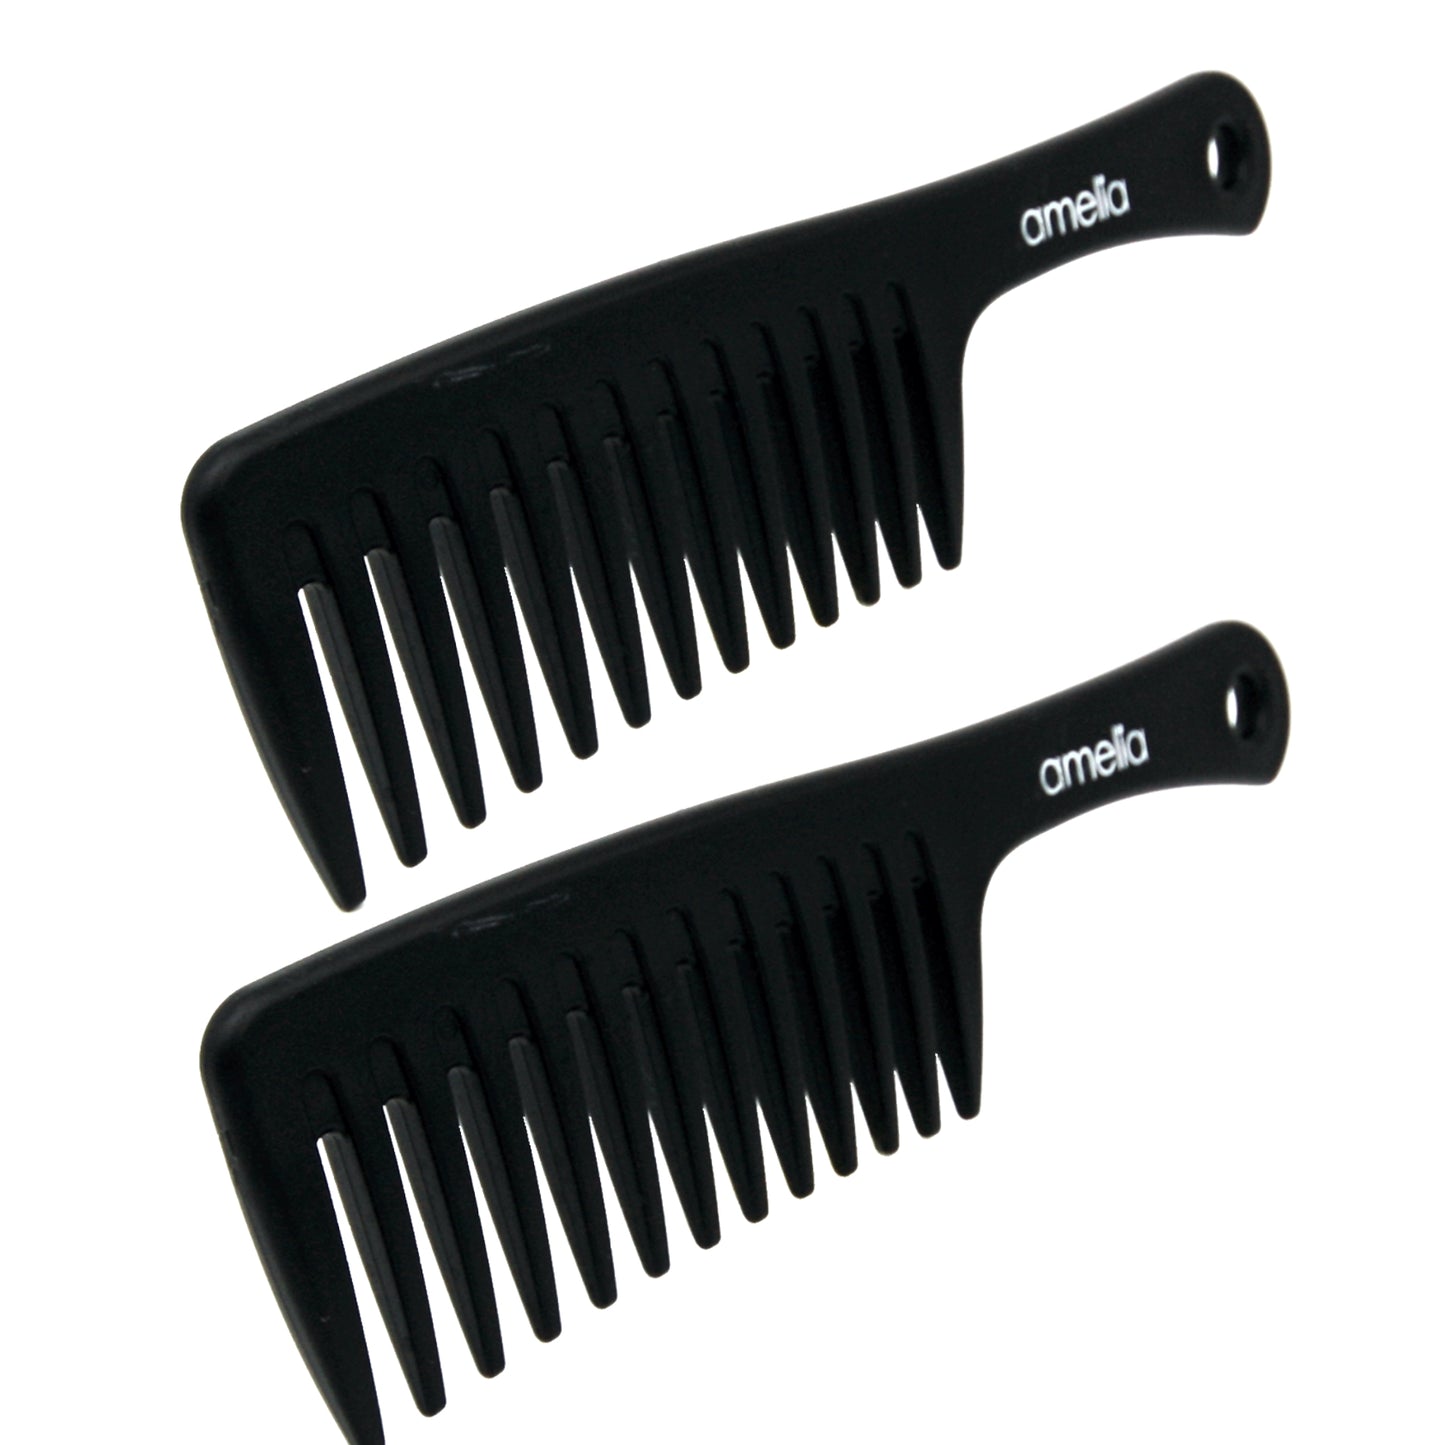 Amelia Beauty, 9in Black Plastic Handle Rake Comb, Professional Grade Hair Comb, Combing Out Long Thick Hair, Wet or Dry, Everyday Styling Cutting Hair Styling Tool, 9.5"x2.25", 2 Pack